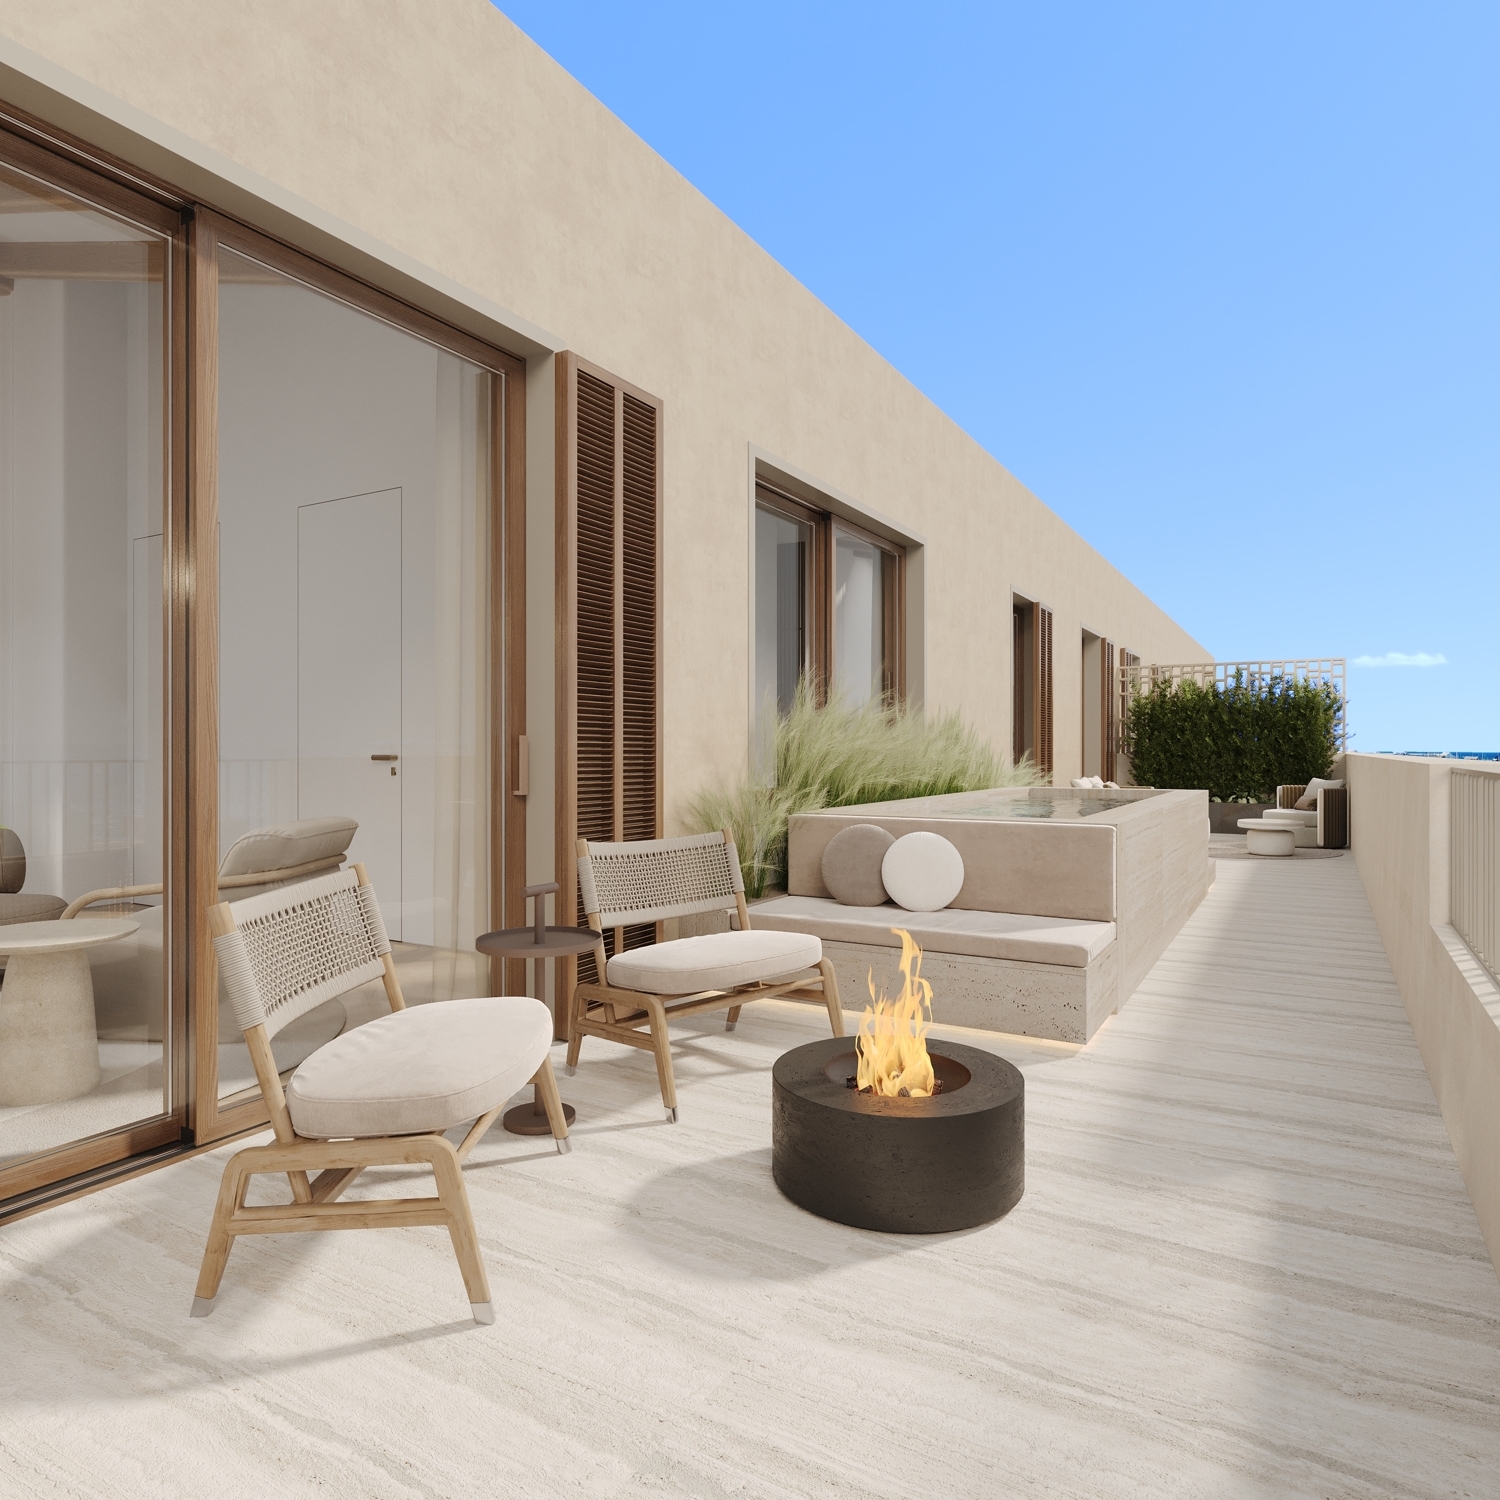 Penthouse with pool: New development in Santa Catalina